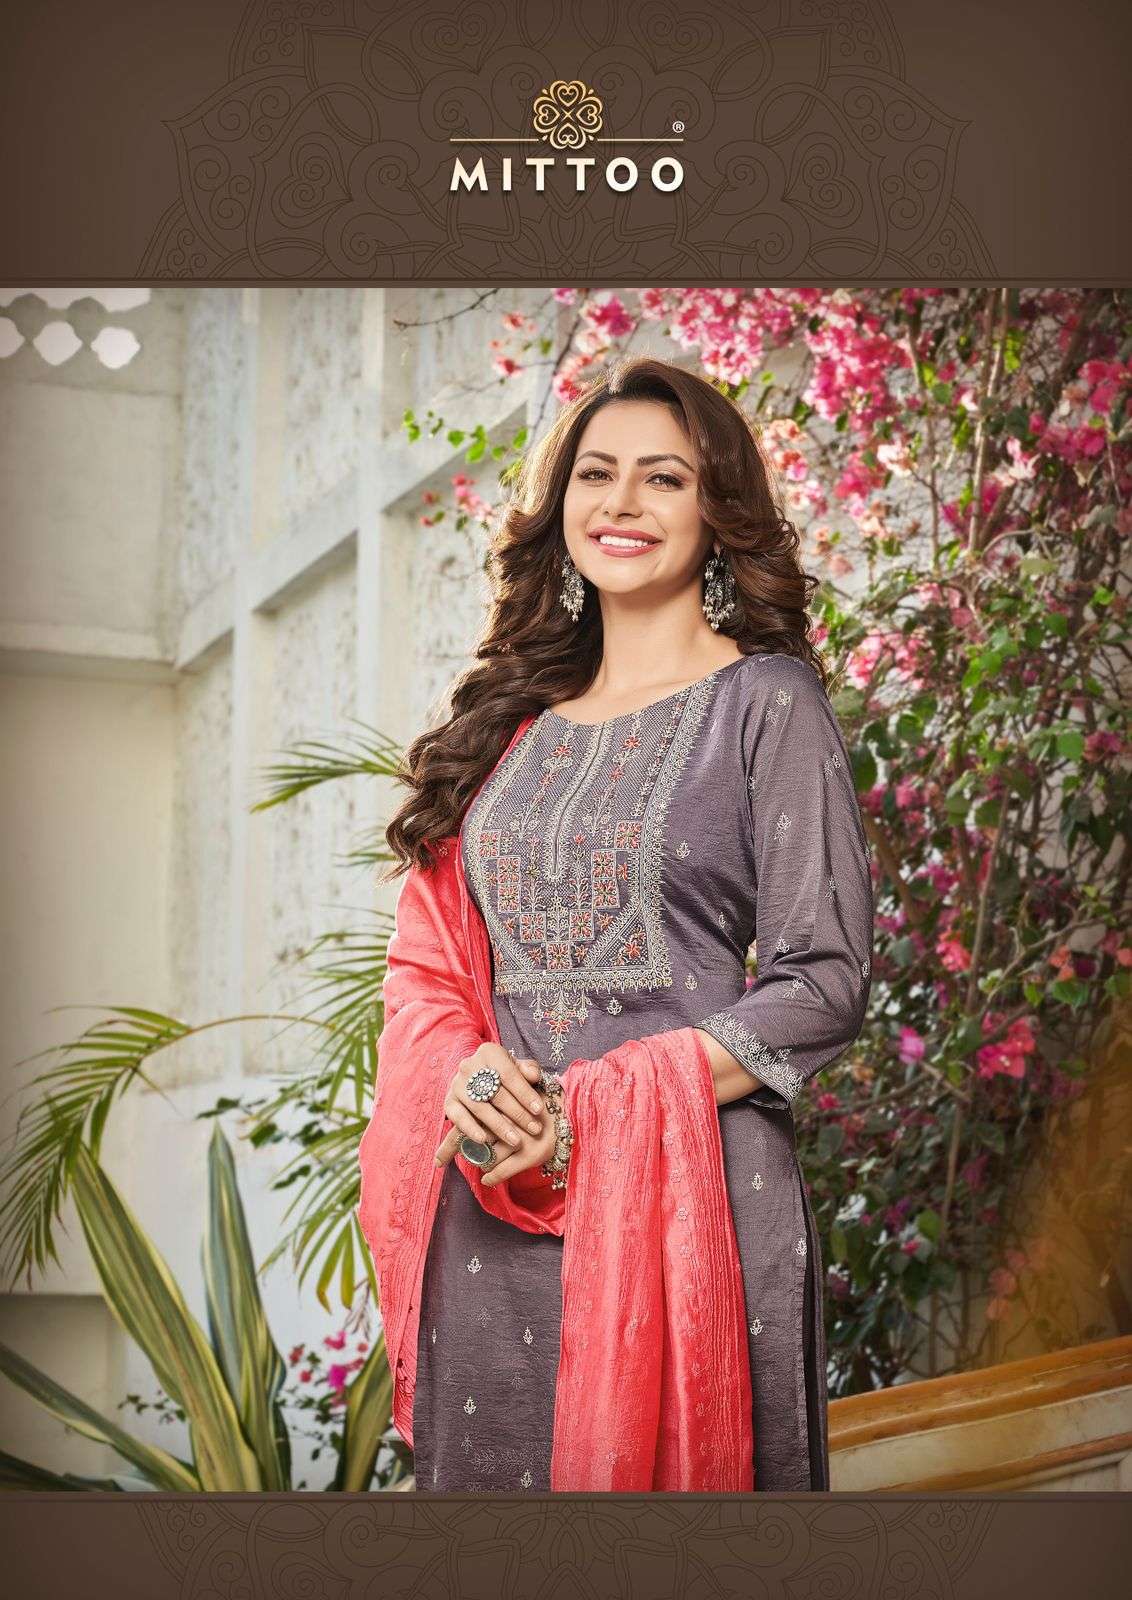 mittoo blue berry 6001-6004 series party wear look kurtis collection wholesale price surat